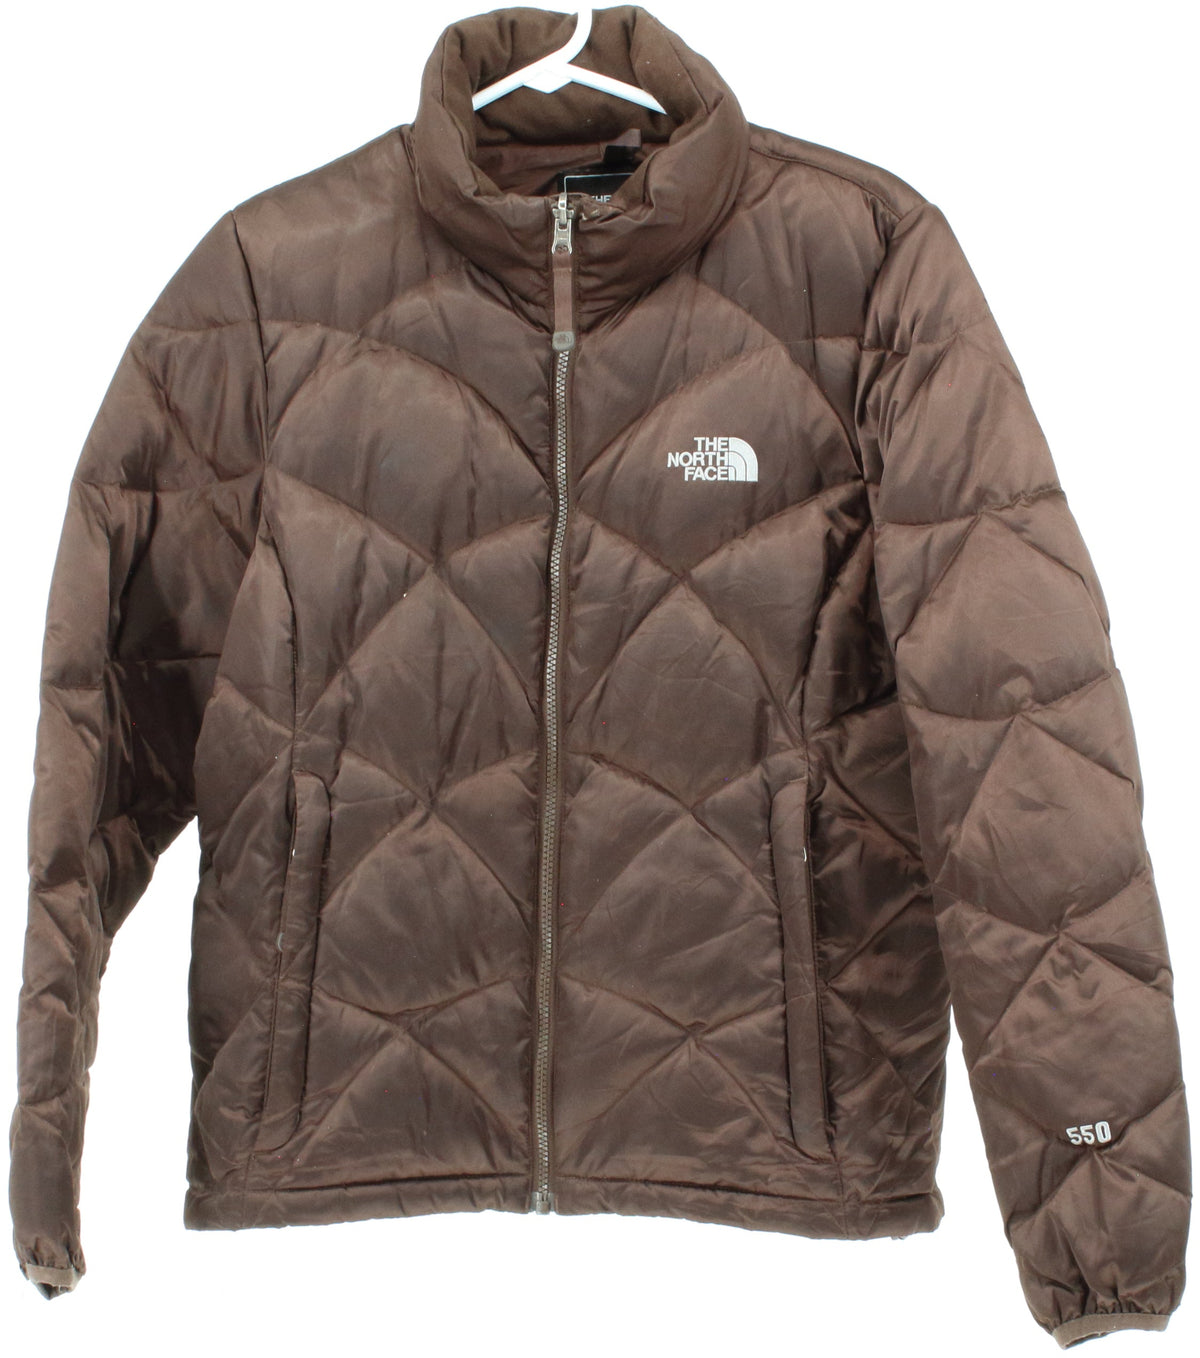 The North Face Brown 550 Insulated Women's Puffer Glossy Jacket